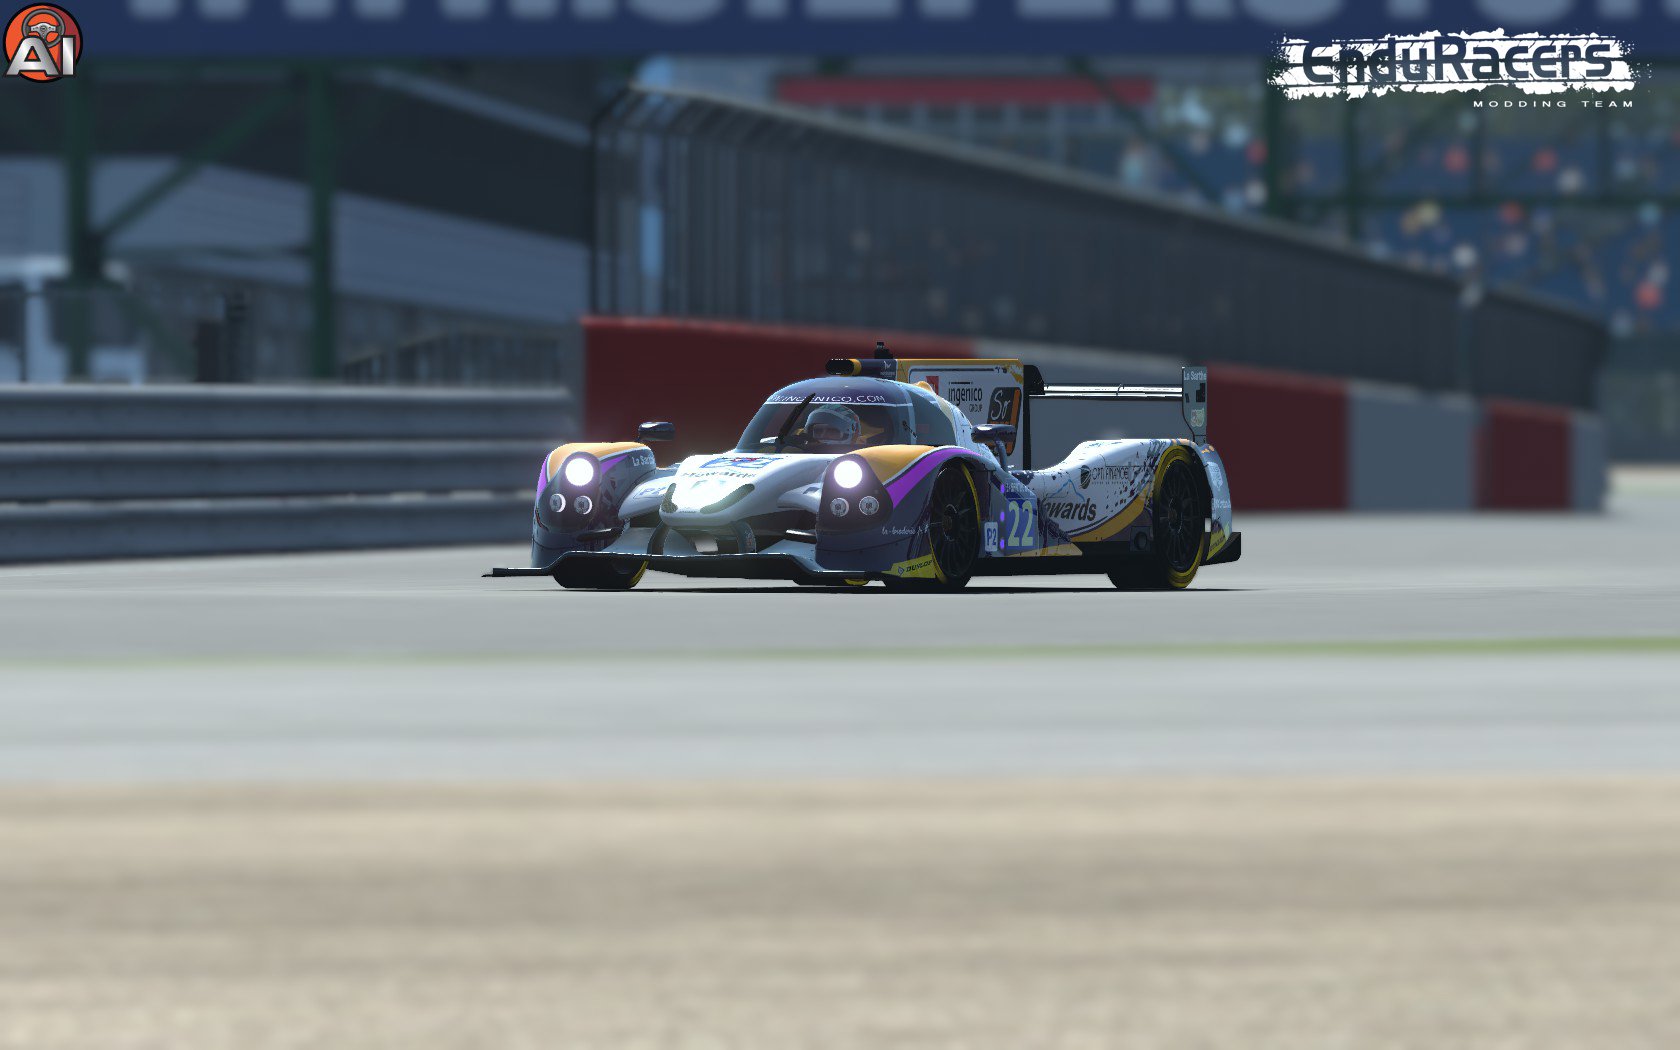 More information about "rFactor 2: Endurance Series v1.50 by Enduracers disponibile!"